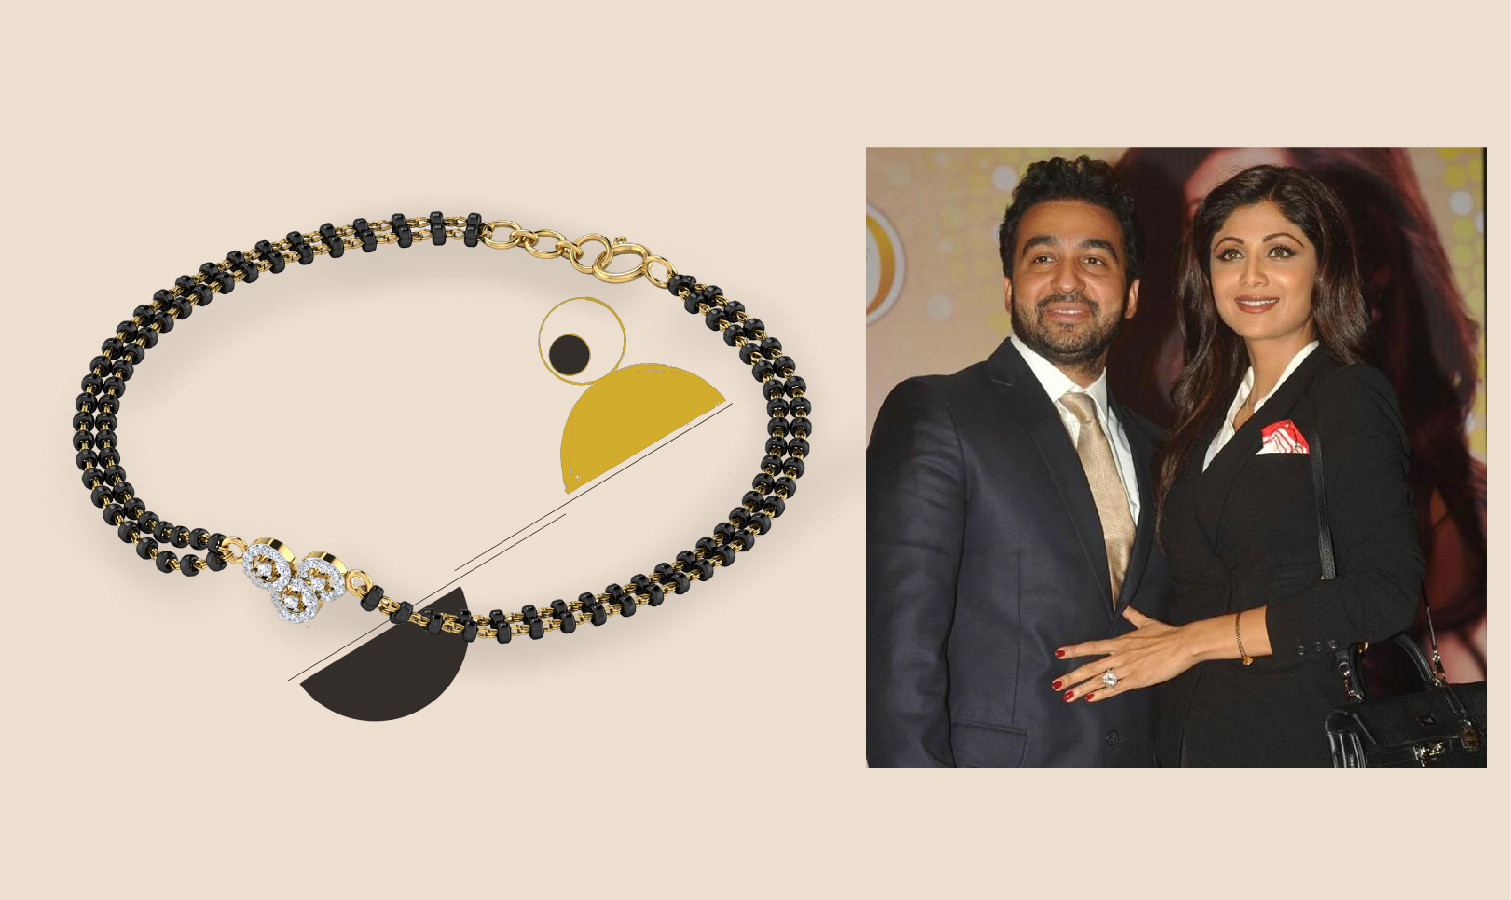 Shilpa Shetty in Black Beads Necklace and Jumkis  Jewellery Designs   Black beads mangalsutra design Black bead necklace Black beads mangalsutra